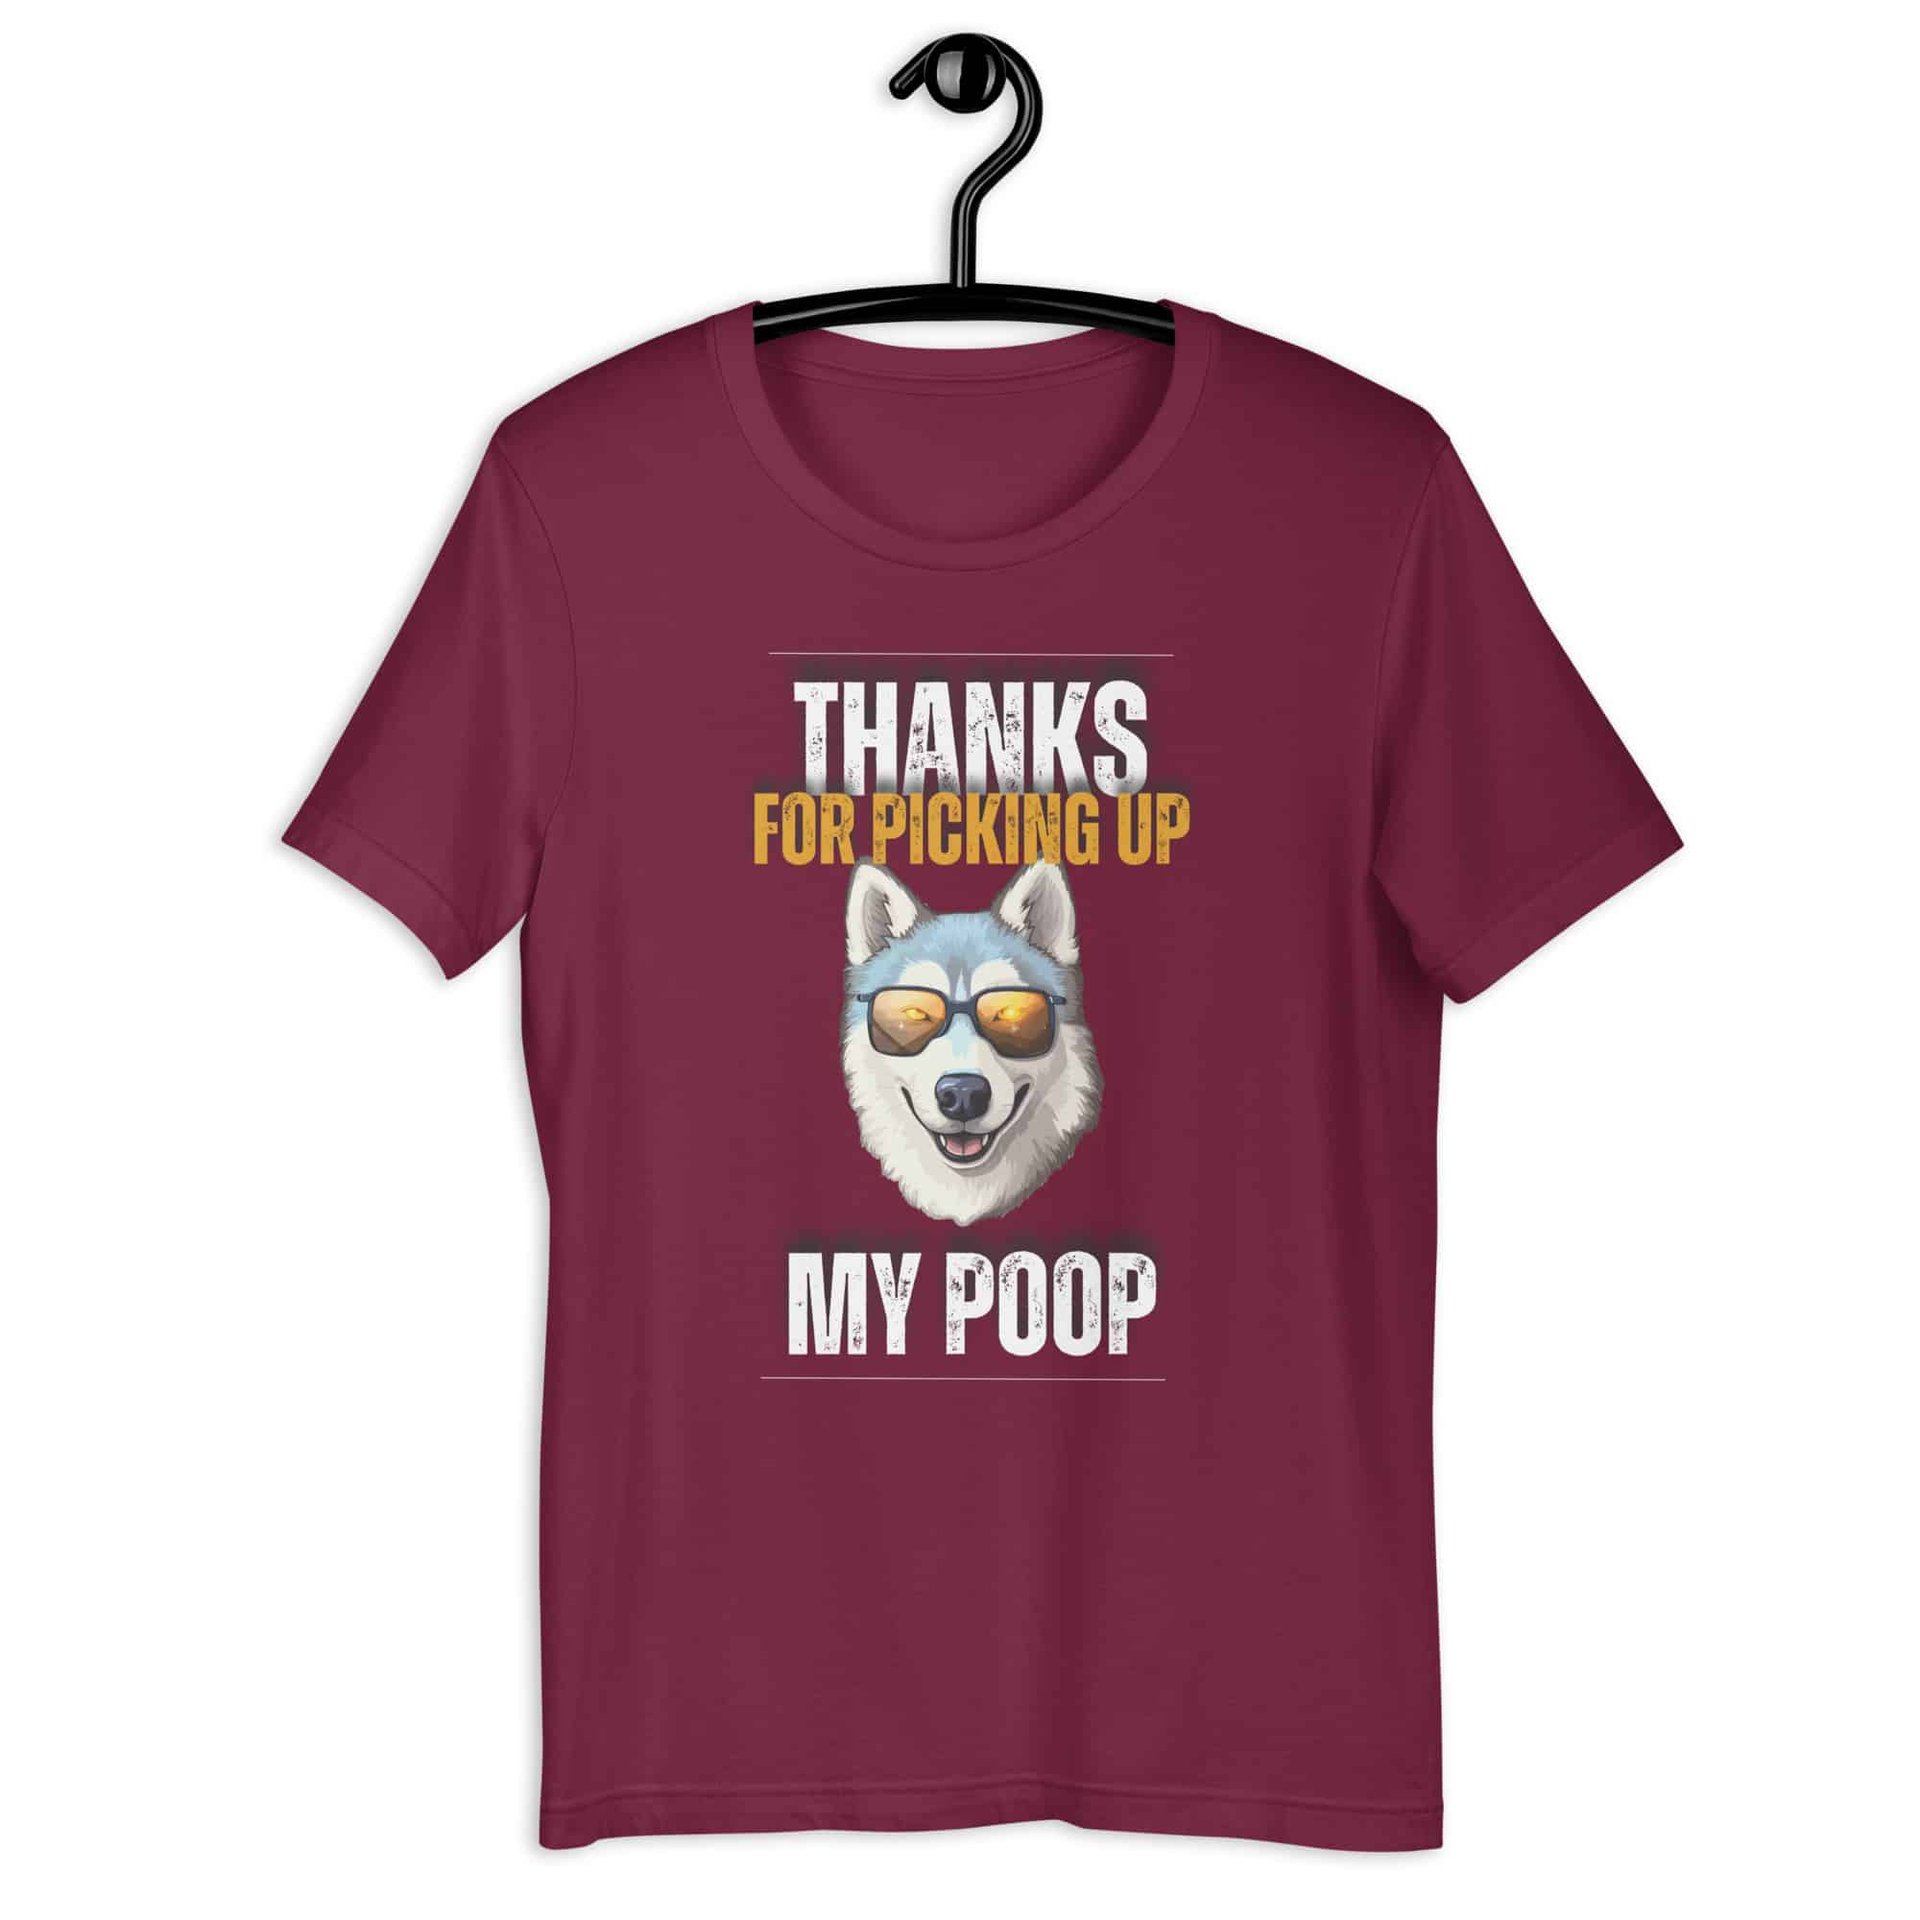 Thanks For Picking Up My POOP Funny Huskies Unisex T-Shirt. Maroon